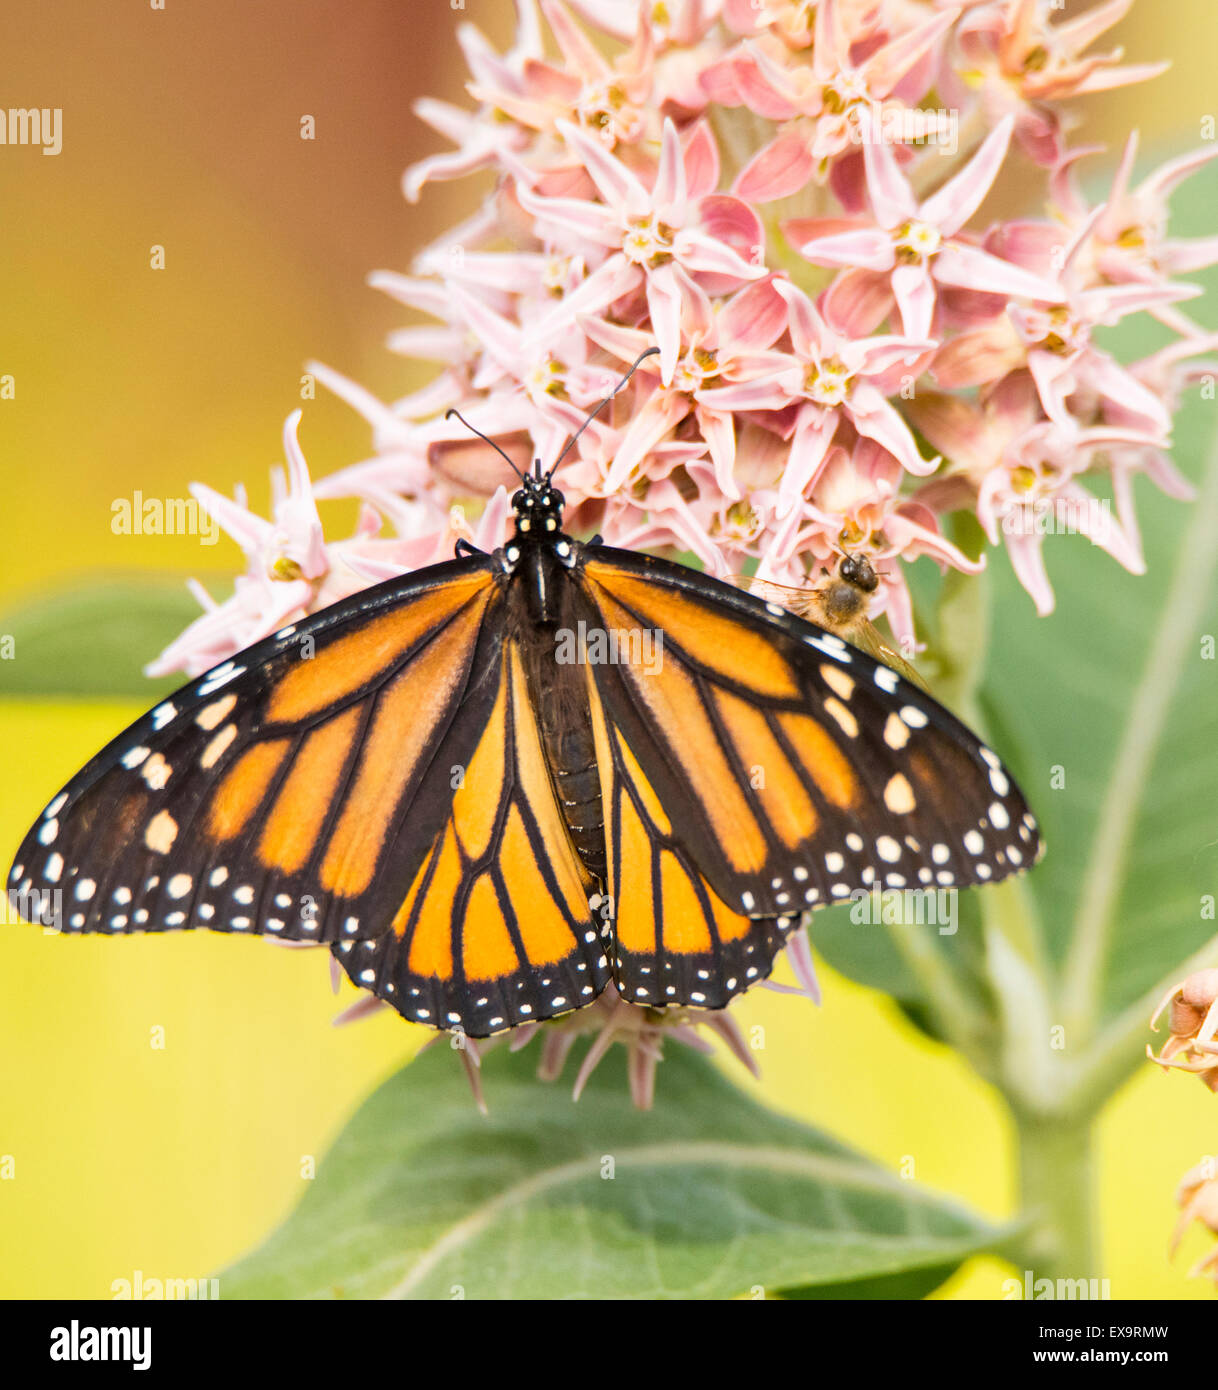 Butterflies, Male Monarch Butterfly sipping nector from Common Blooming Milkweed Plant. Idaho, USA, North American Stock Photo